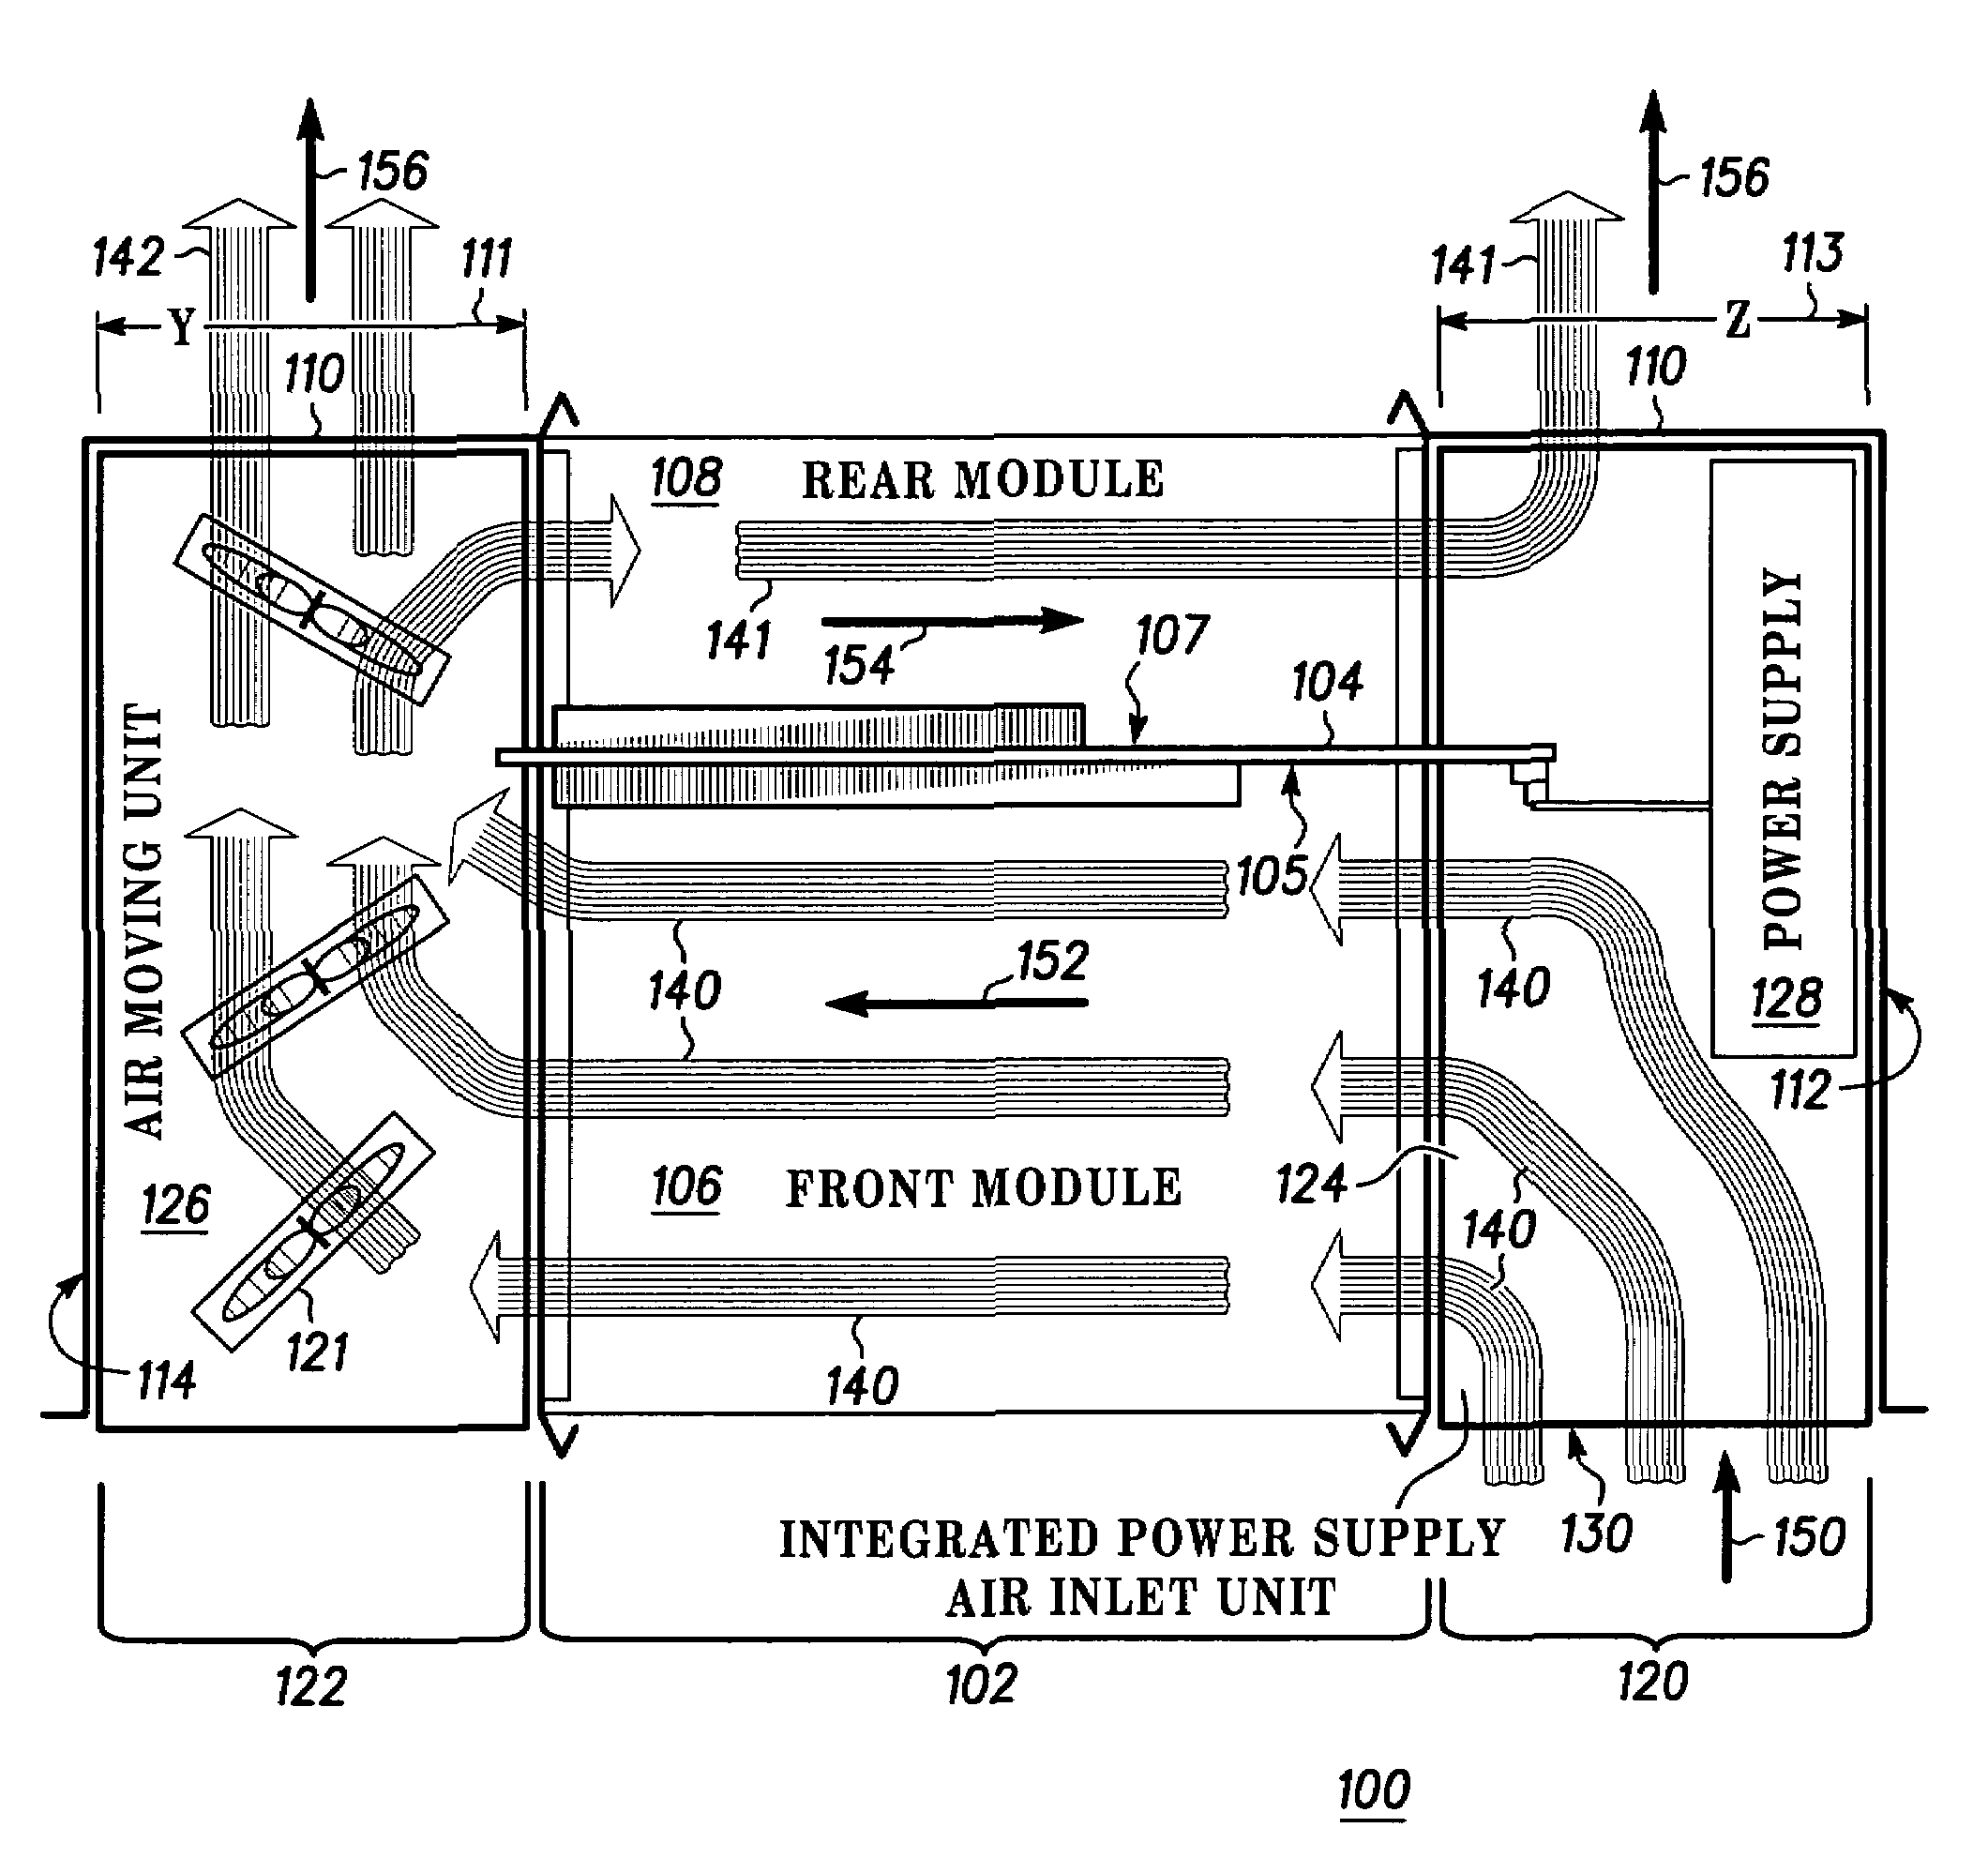 Integrated power supply and air inlet unit